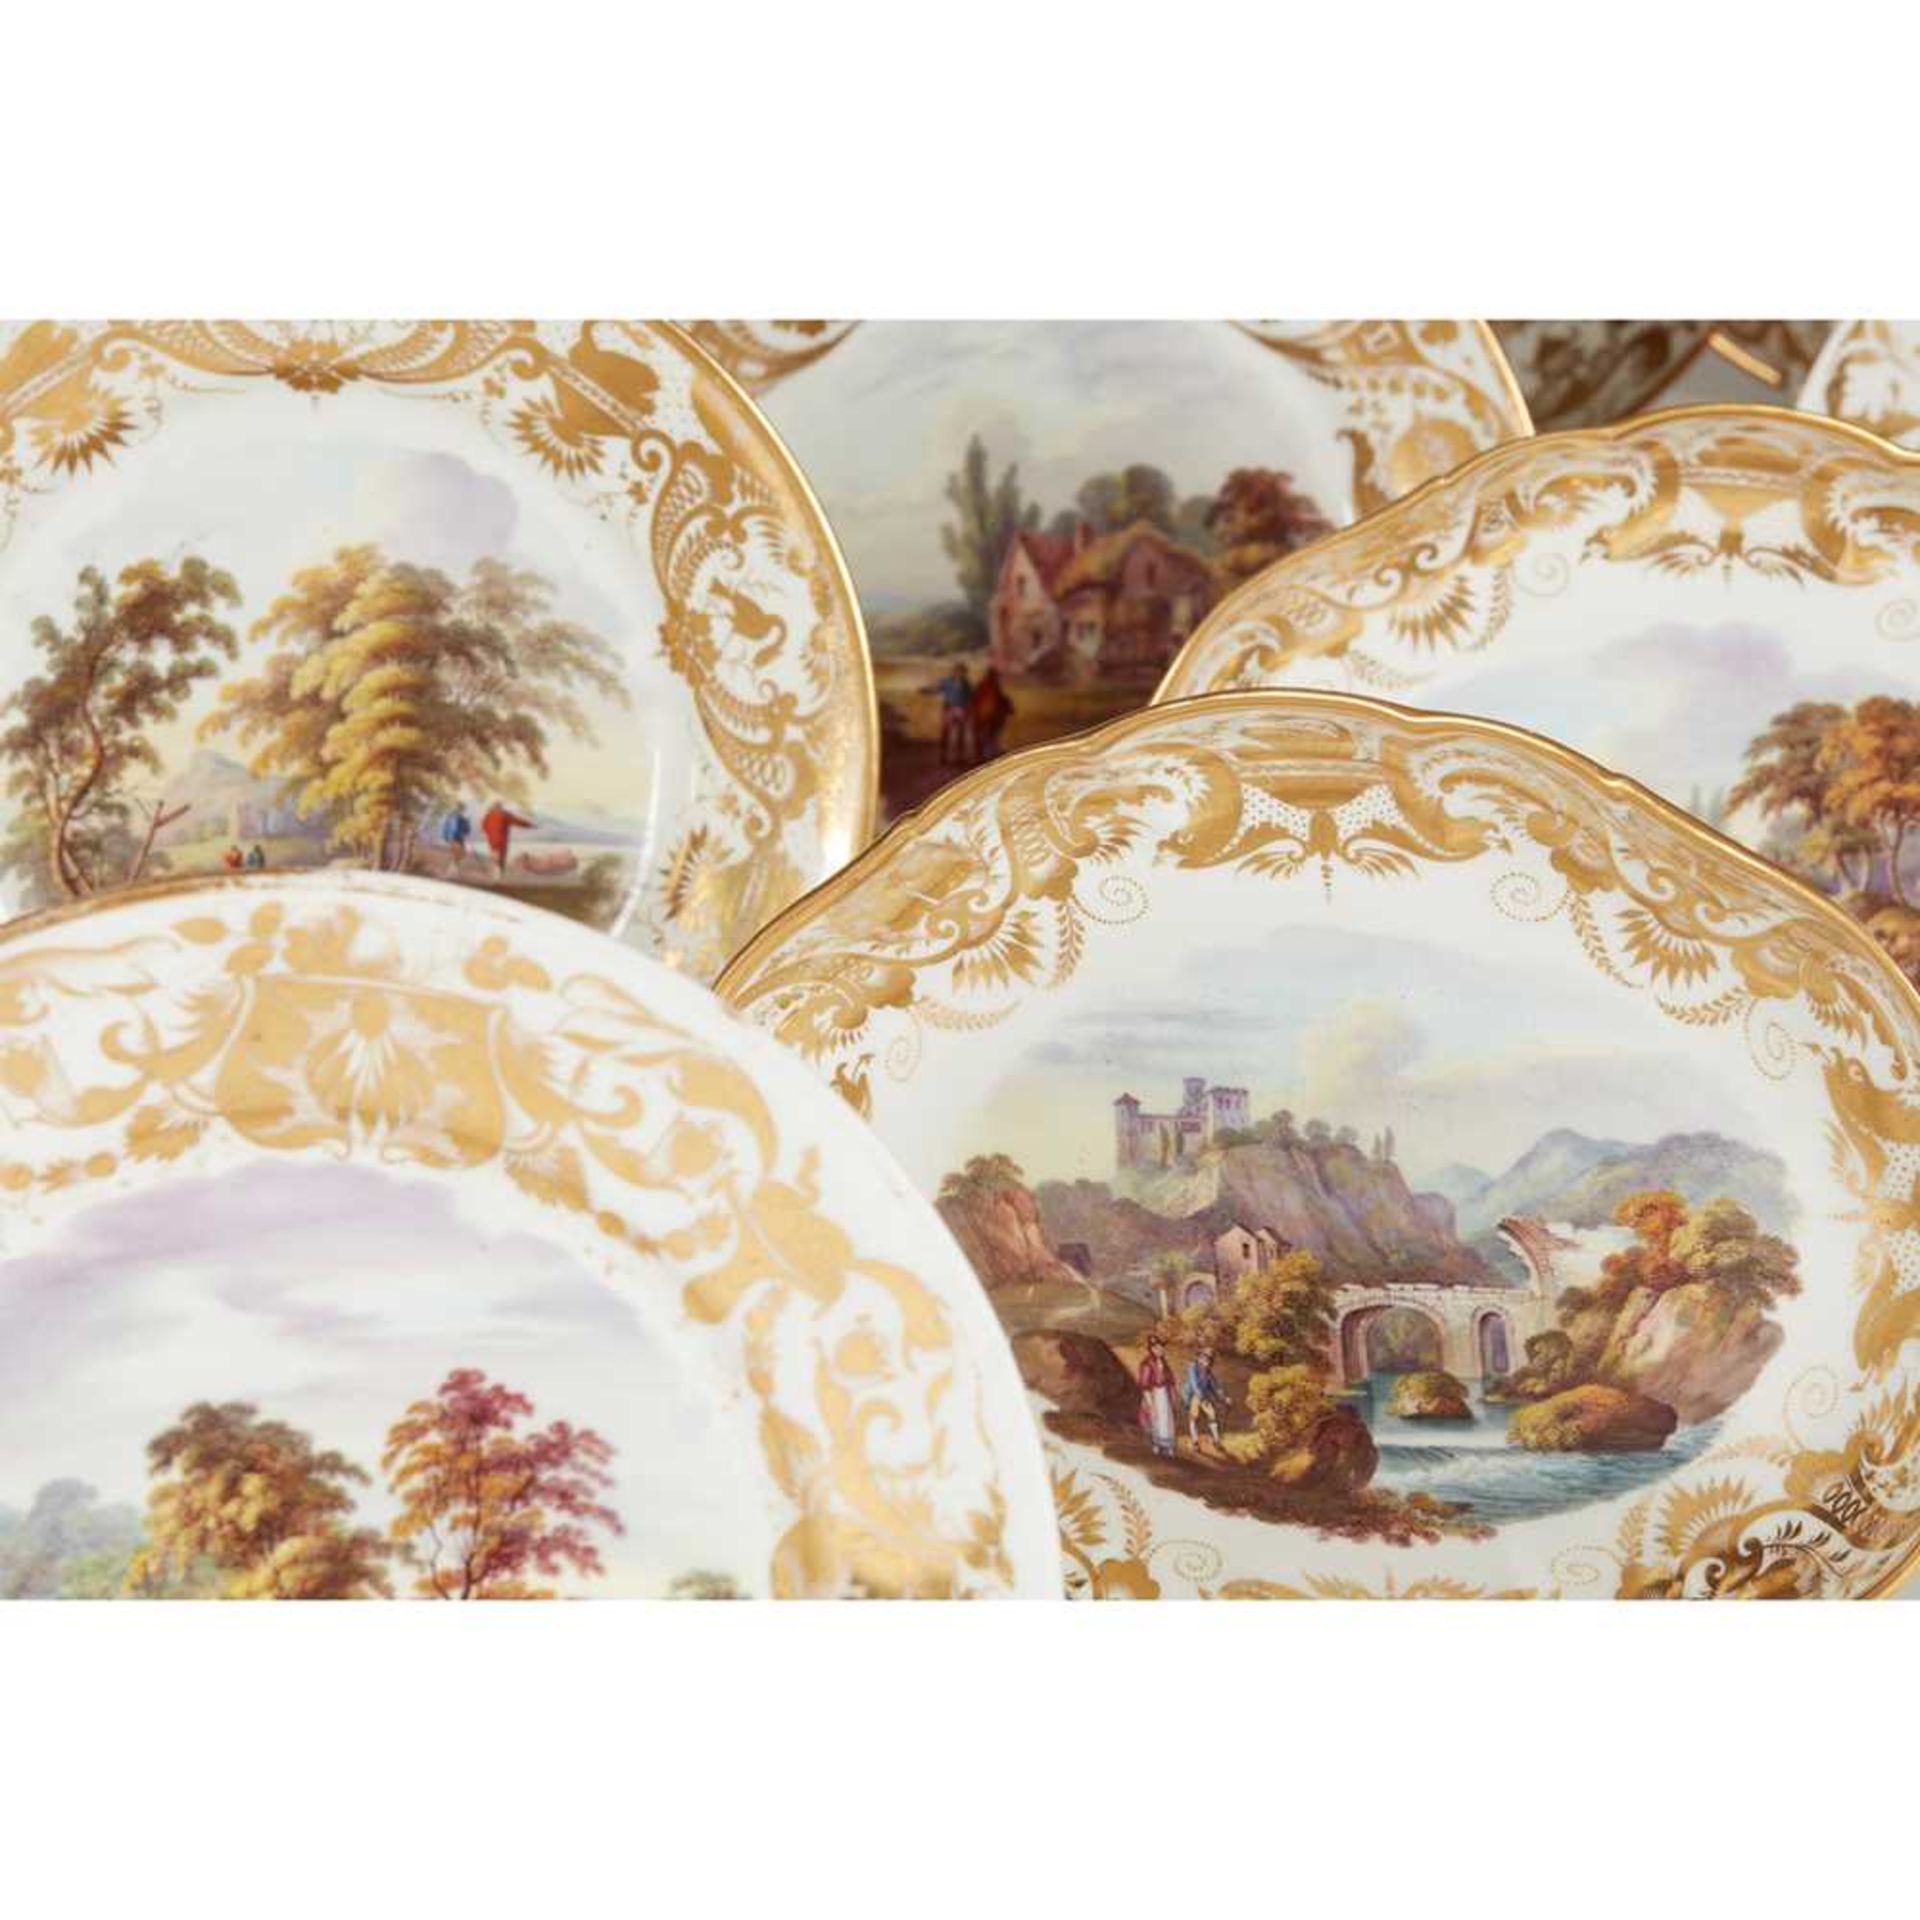 MATCHED DERBY PORCELAIN TOPOGRAPHICAL PART DESSERT SERVICE EARLY 19TH CENTURY - Image 8 of 8